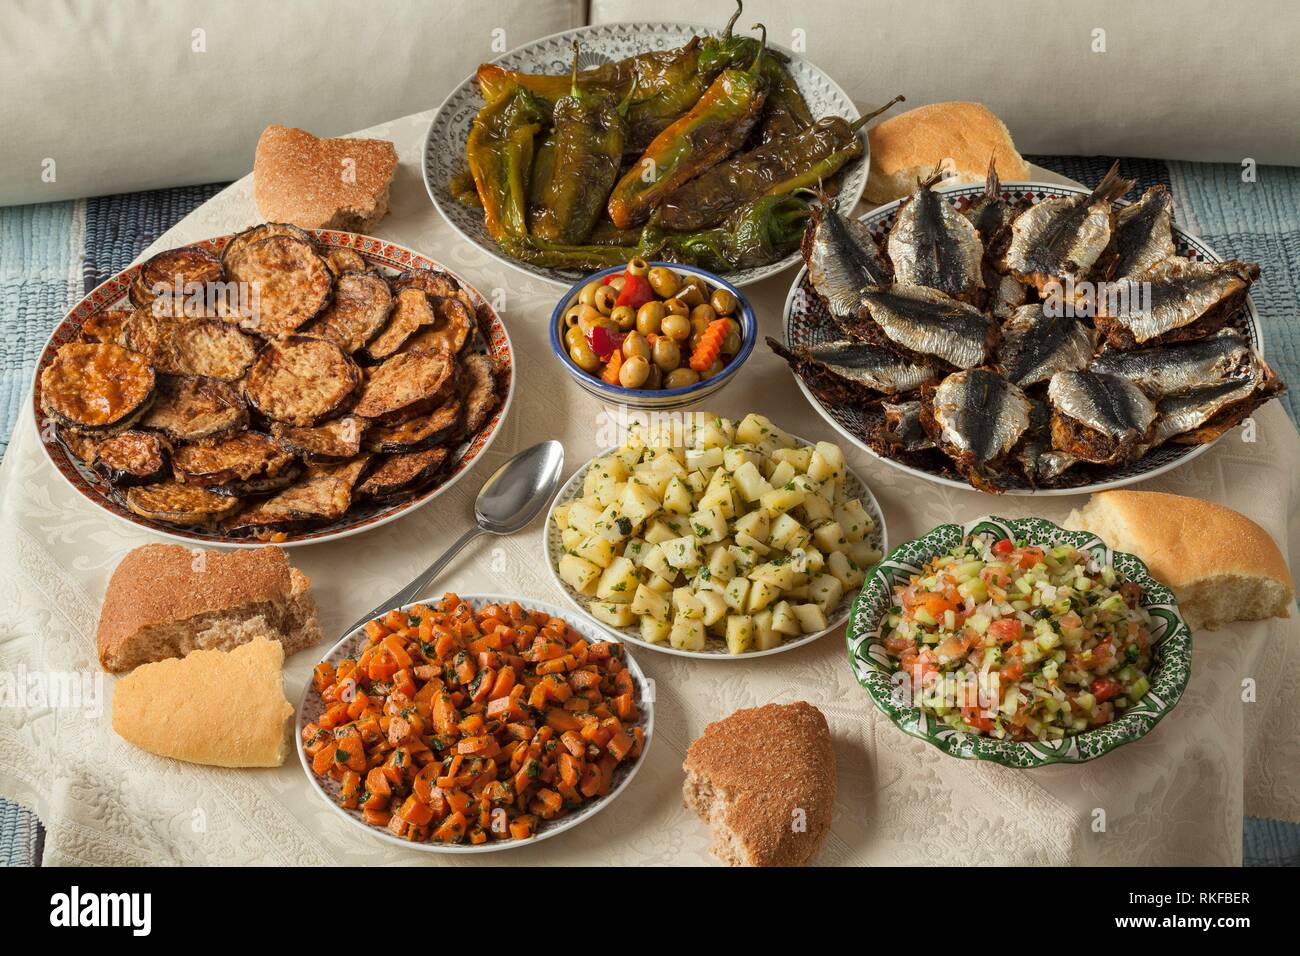 Moroccan meal with a variety of dishes with fresh cooked sardines, vegetables and bread. Stock Photo